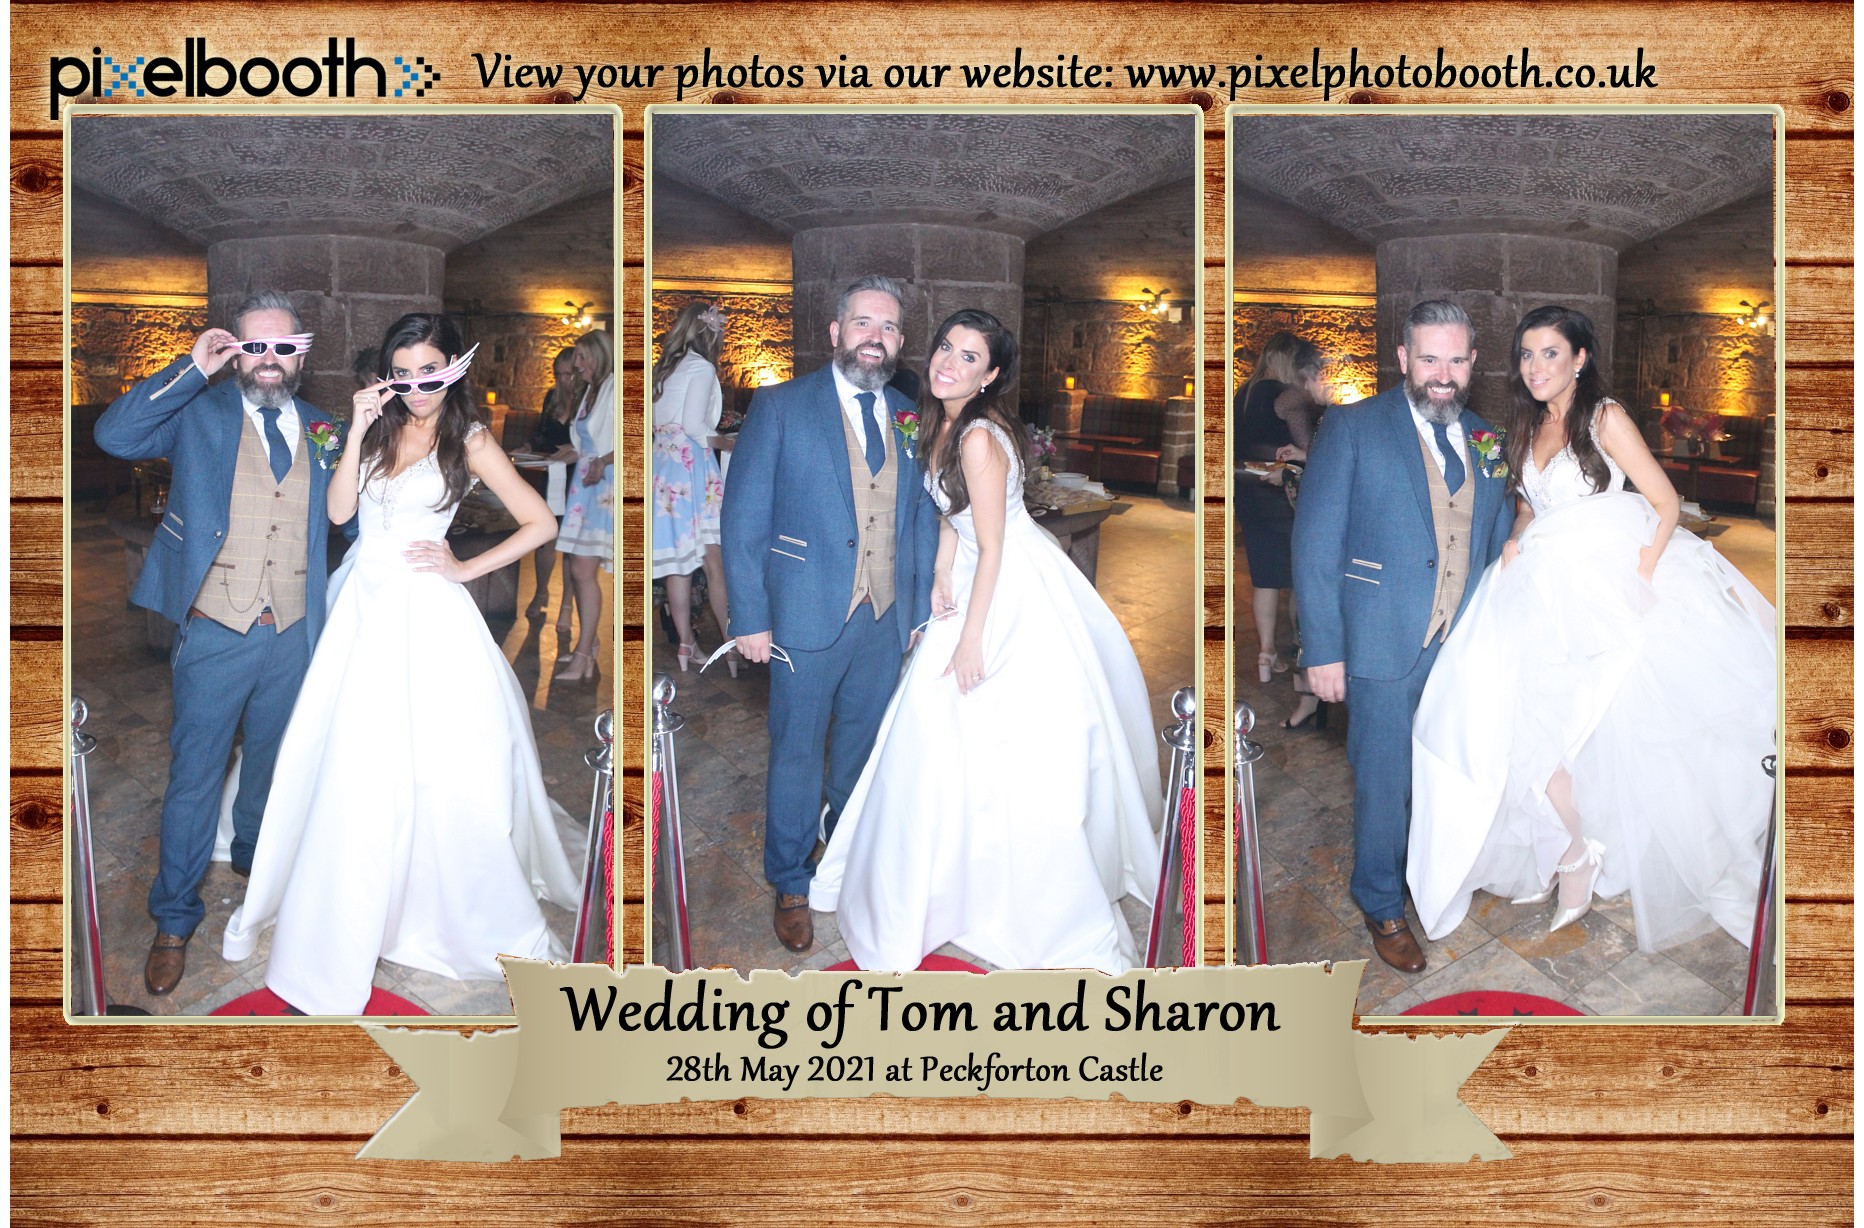 28th May 2021: Tom and Sharon's Wedding at Peckforton Castle